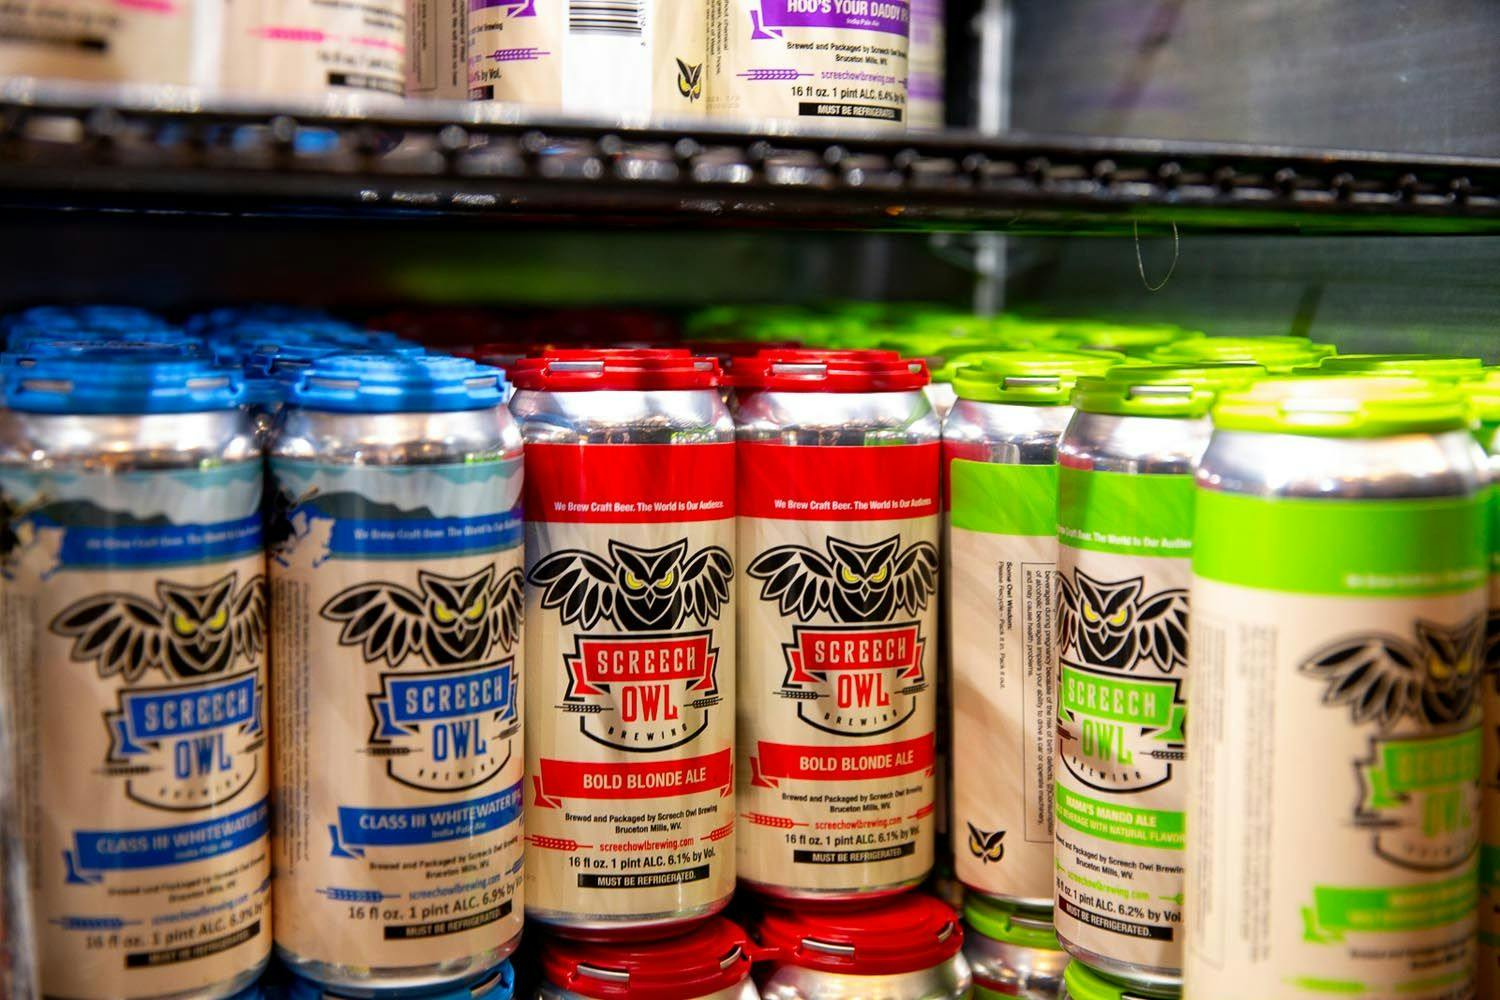 A variety of Screech Owl beer cans